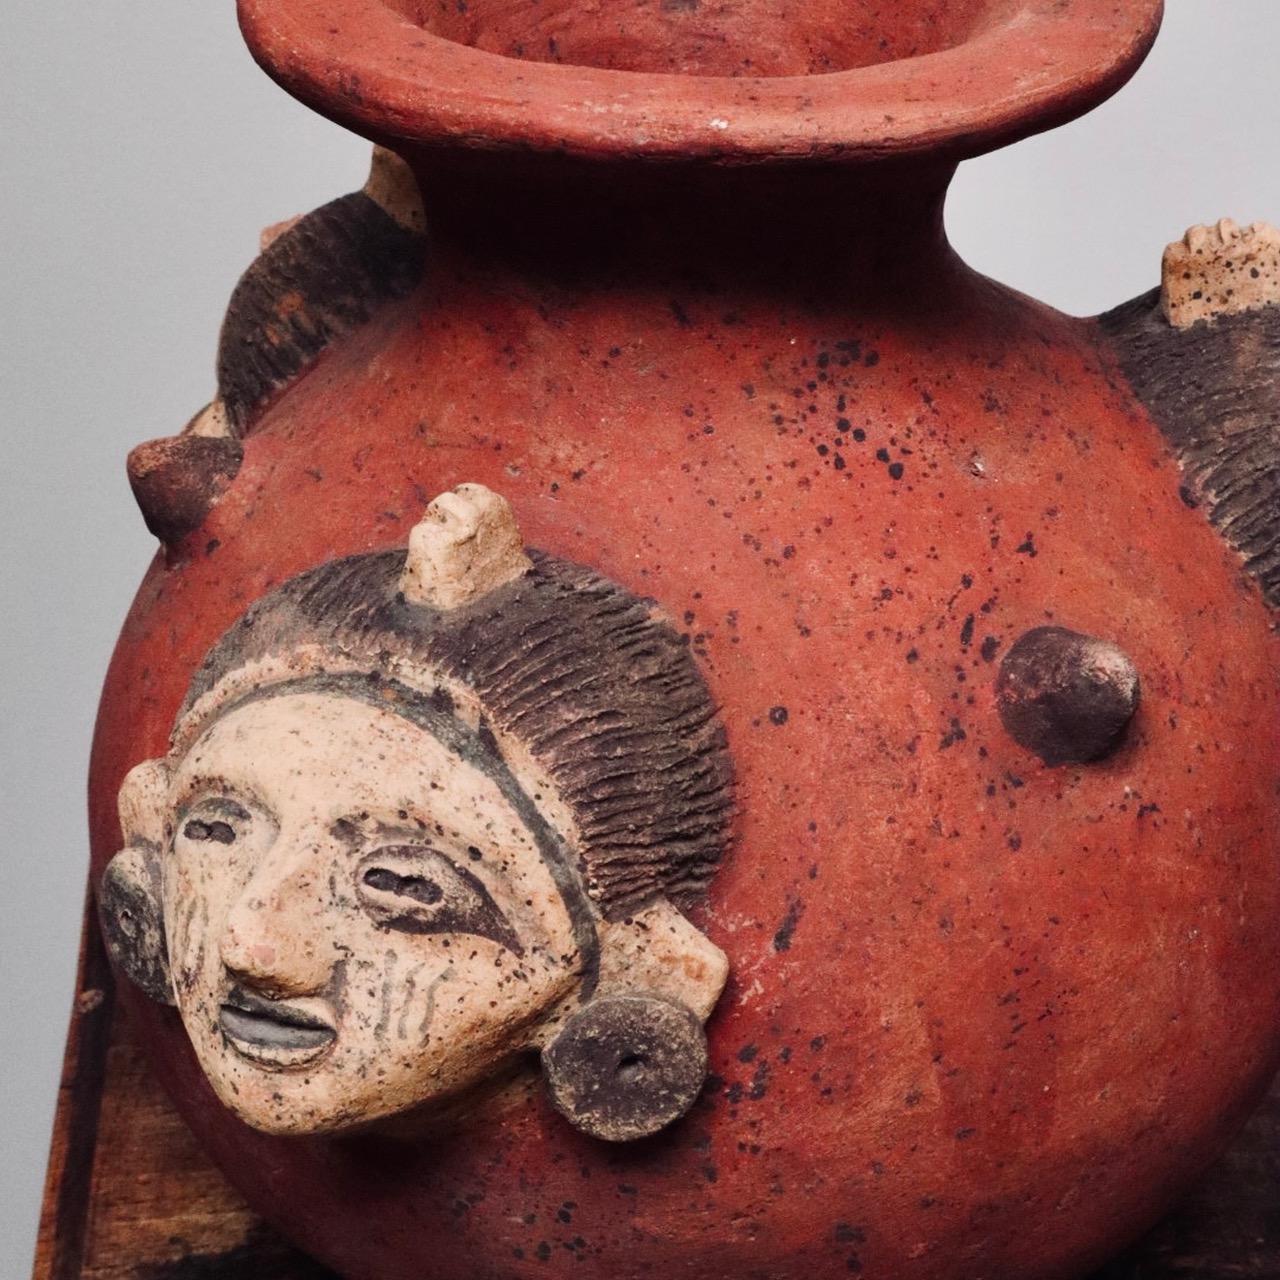 Nicanor is a decorative terra-cotta vessel with ornate figureheads showcasing the craftsmanship of the local artisans.

Discovered in an abandoned potters studio in the state of Jalisco, Mexico.

Nicanor
Mexico, 1980
Dimensions: 8